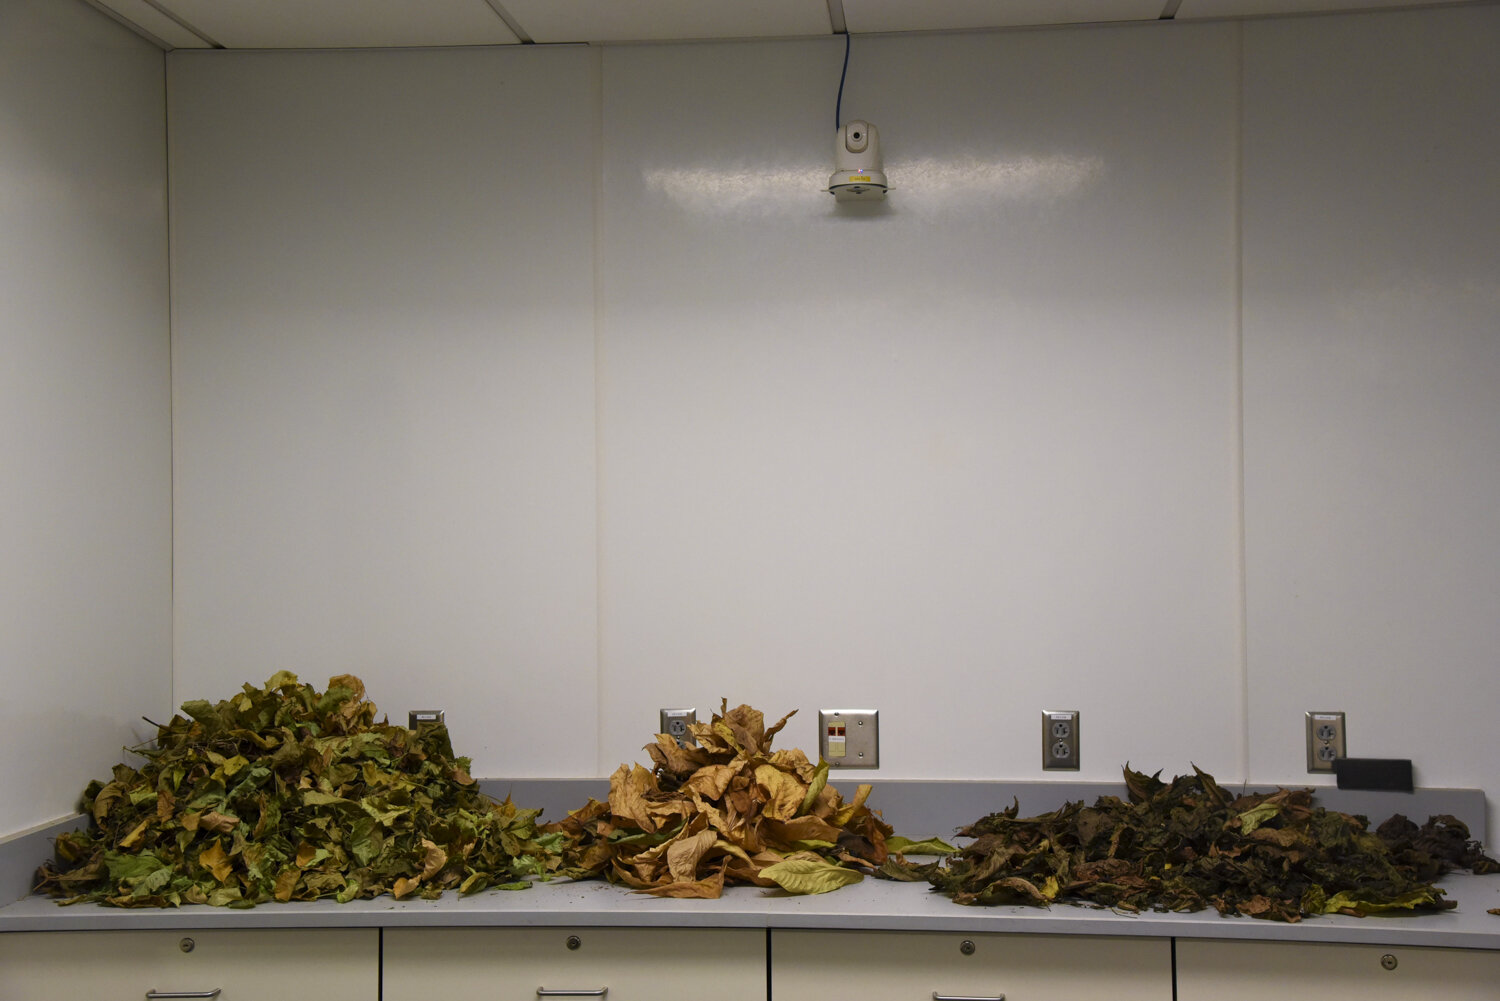  Leaves are collected from local trees and then sorted by tree species at State University of New York College of Environmental Science and Forestry (SUNY-ESF lab) where the Chittenango snails are given a specialized diet of leaves at different stage